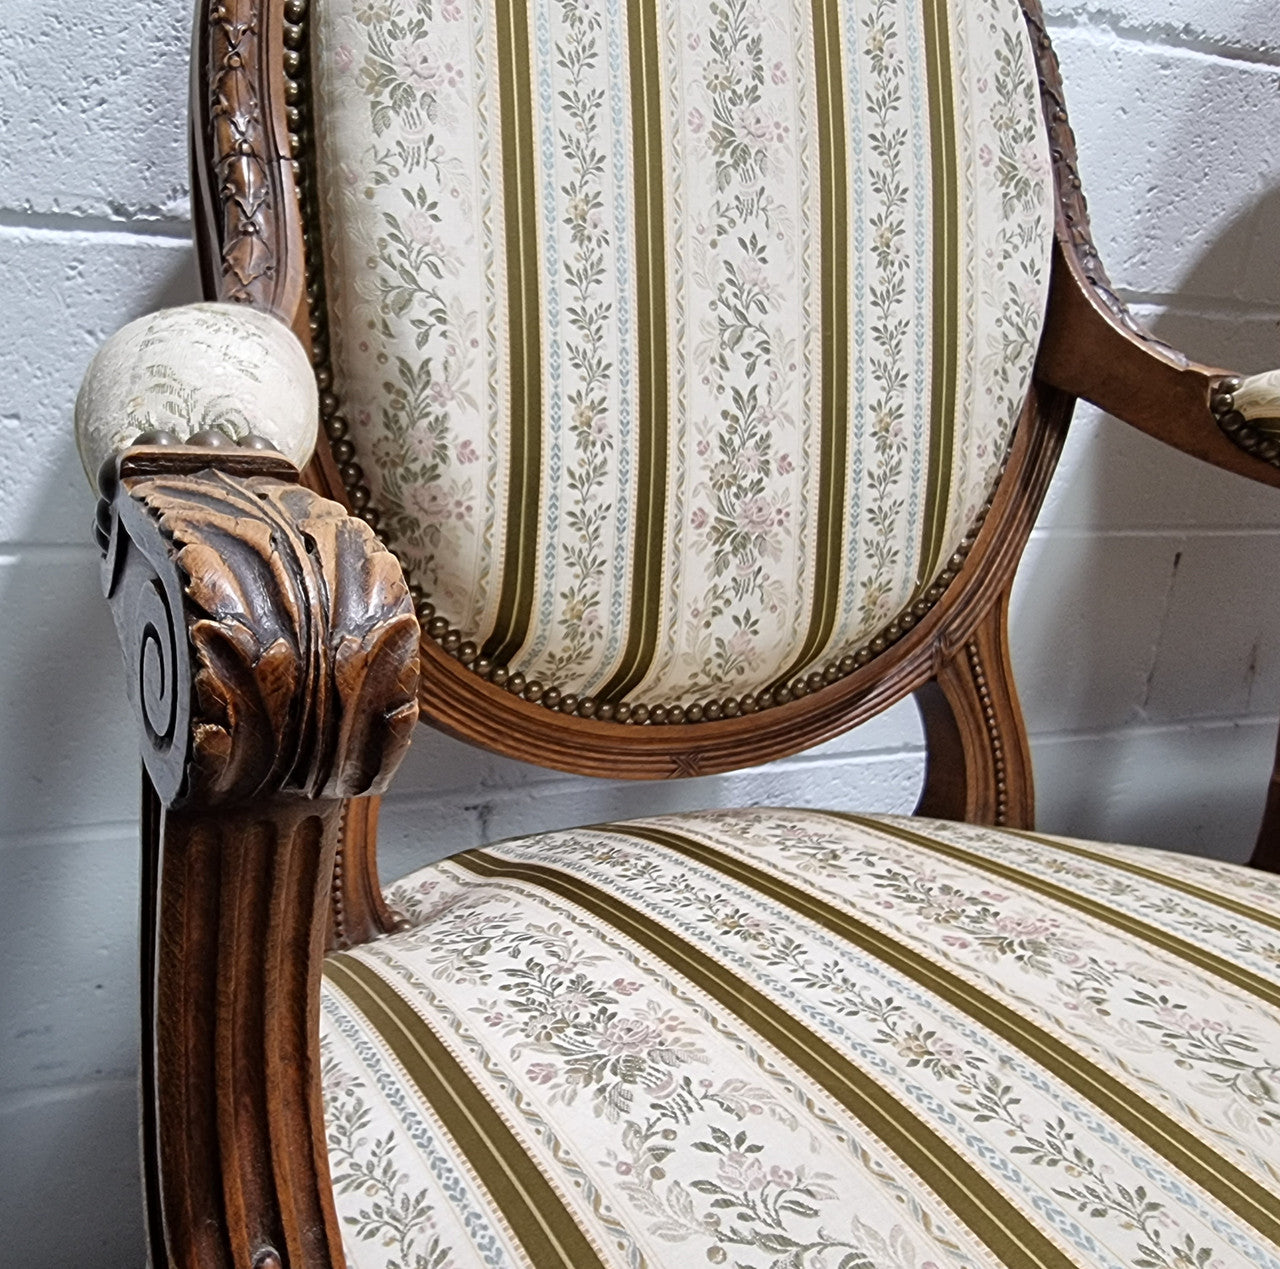 Pair of French Louis XV matching carved armchairs. They are in good overall condition with some slight wear to fabric, please view photos as they help form part of the description.